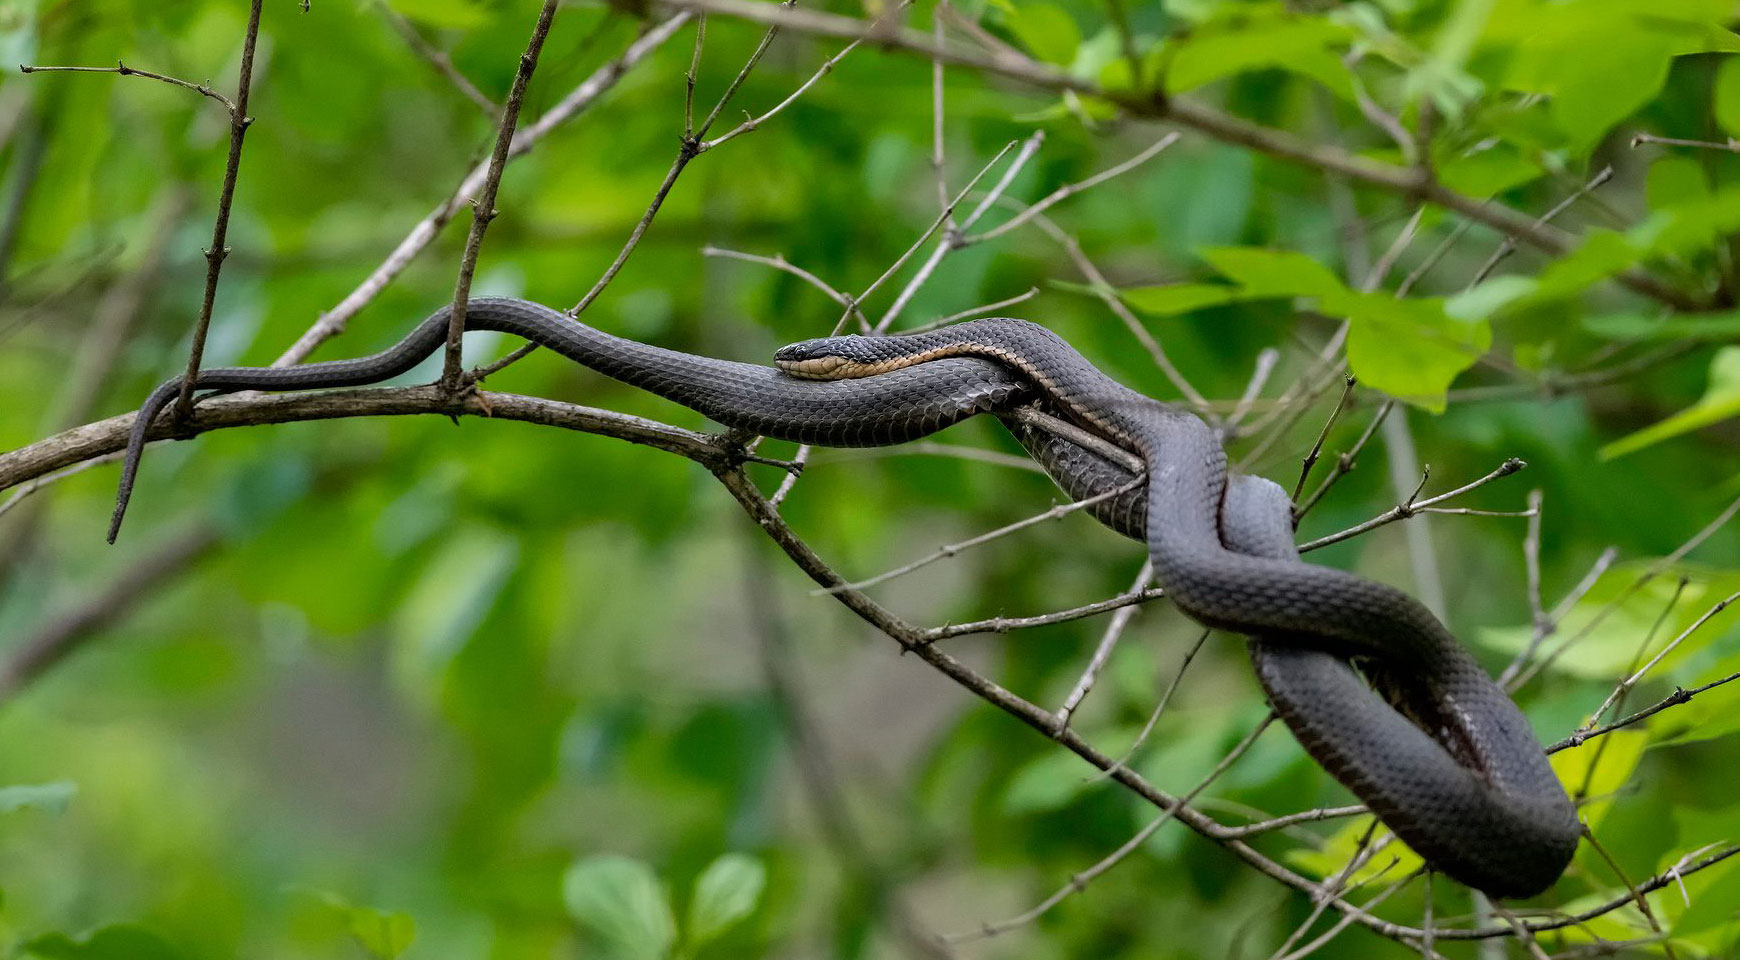 A queen snake slithering on a leafy branch